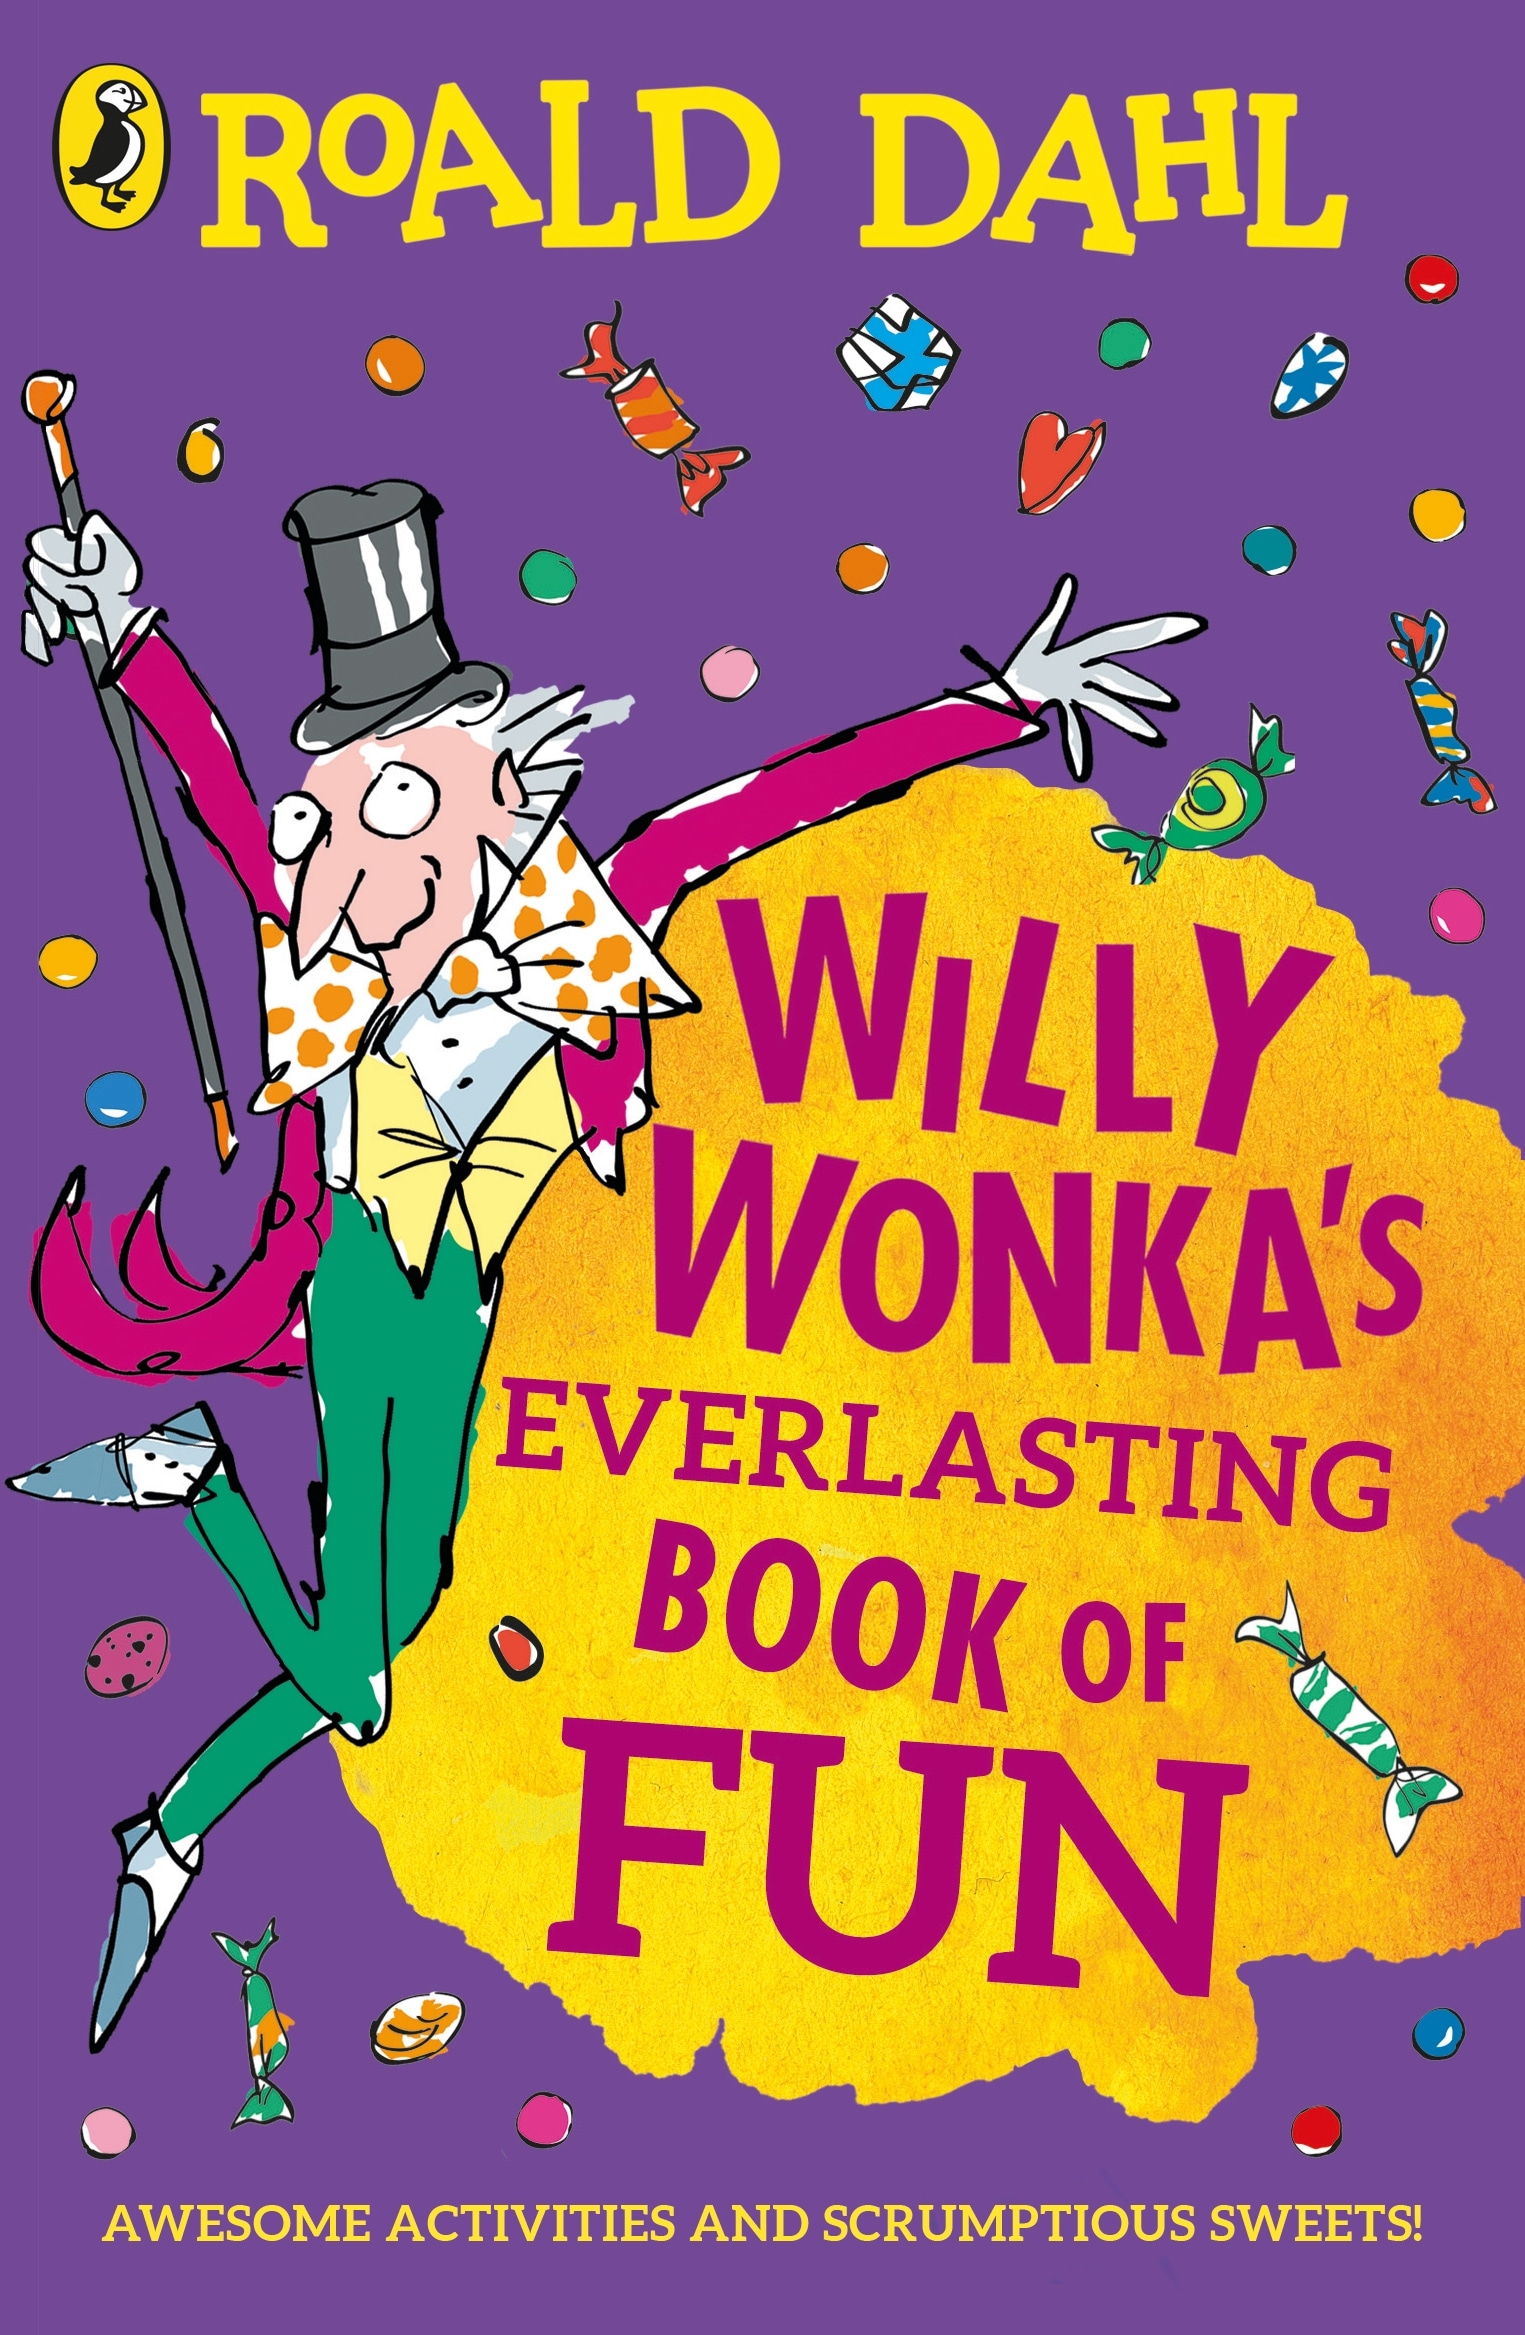 Book “Willy Wonka's Everlasting Book of Fun” by Roald Dahl — February 6, 2020